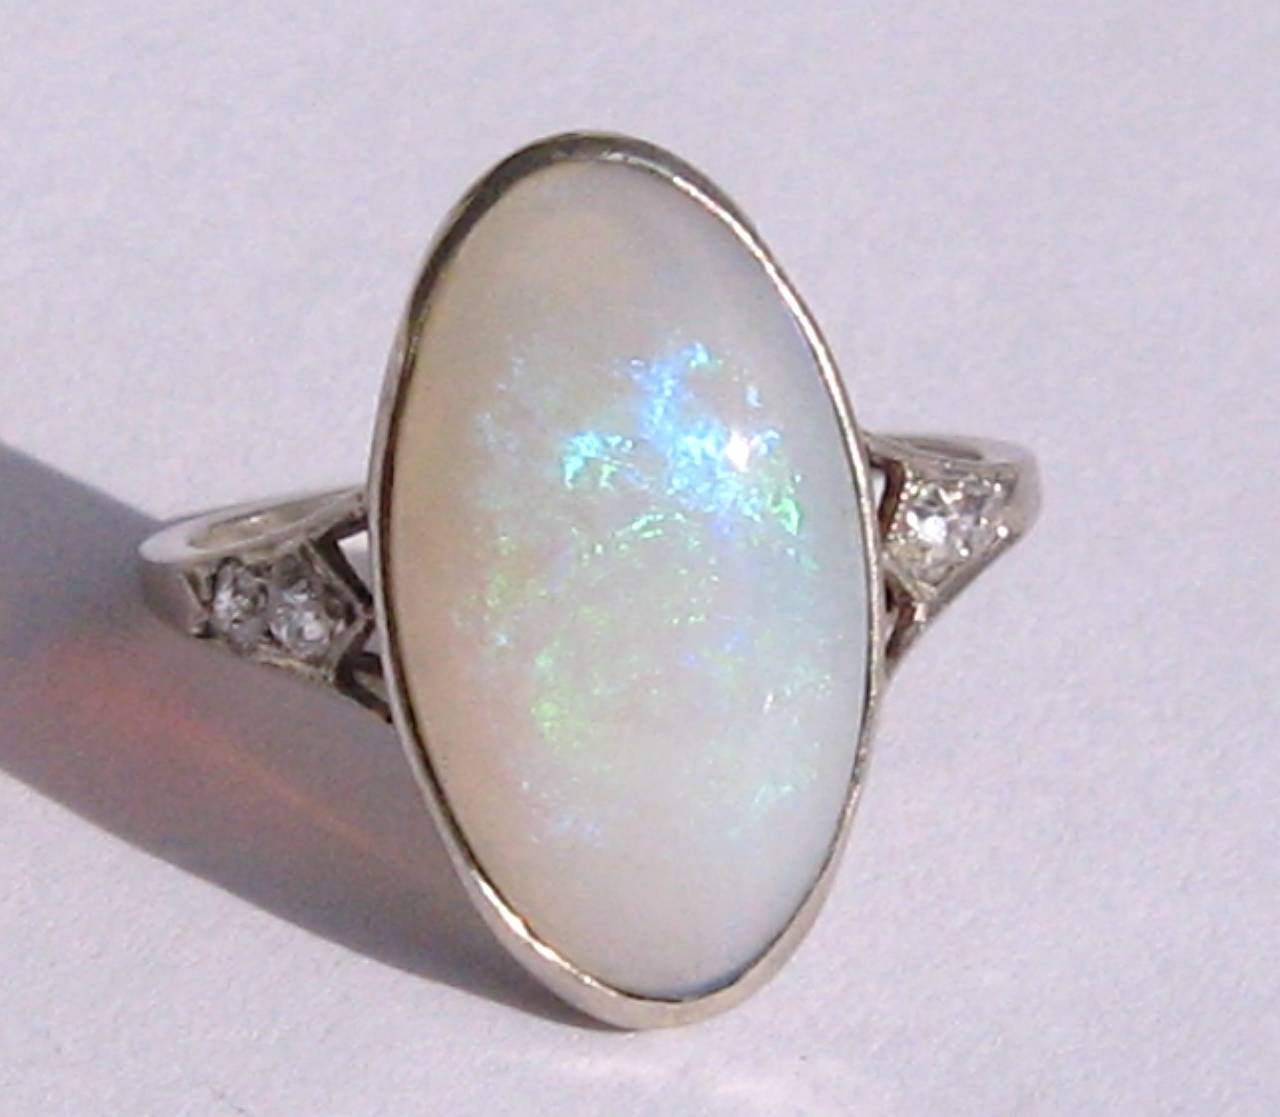 Pictures don't do this opal justice, wonderful fire in this Large oval opal
Two accent diamonds flank both sides of the shank
Bezel set 
Ring is a size 6.5 and can be sized by your jeweler or us

Measures 
.71